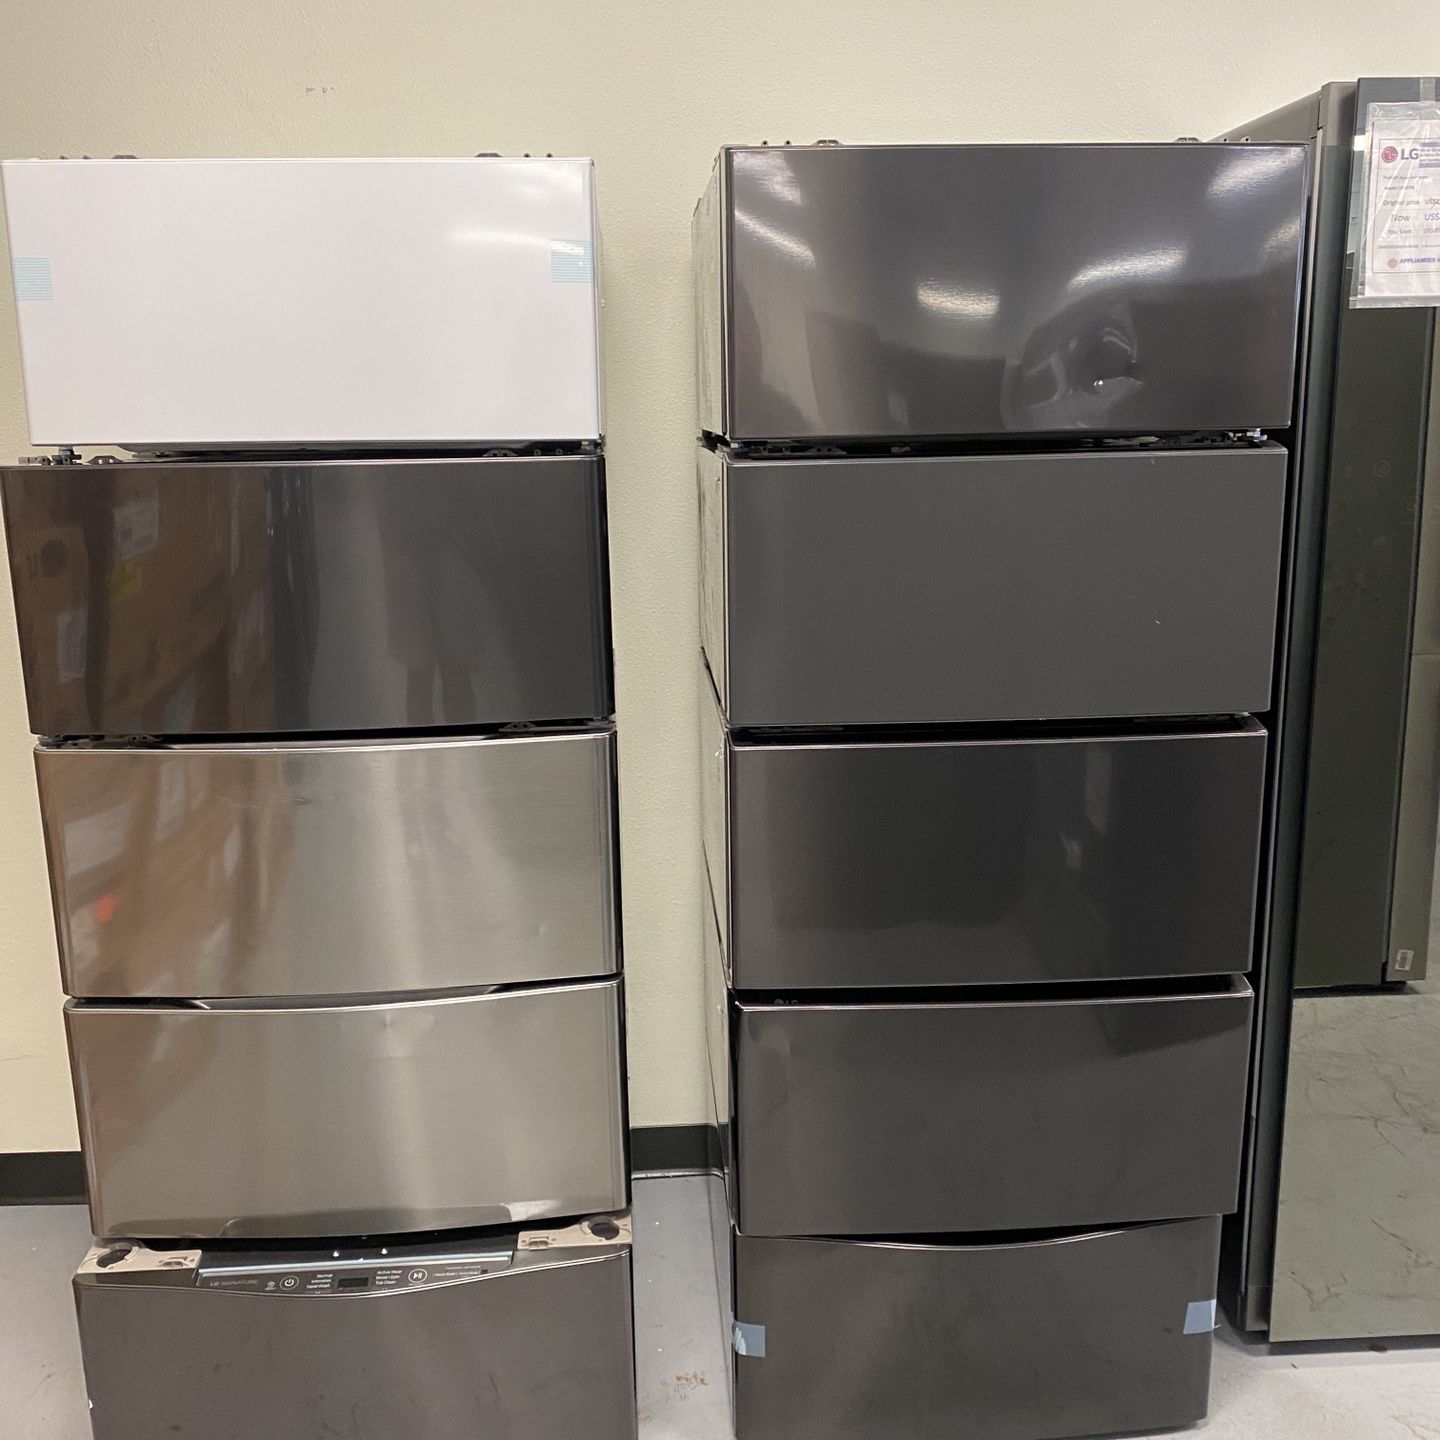 All LG and Samsung Brand washer and dryer  pedestal ＄100 each 